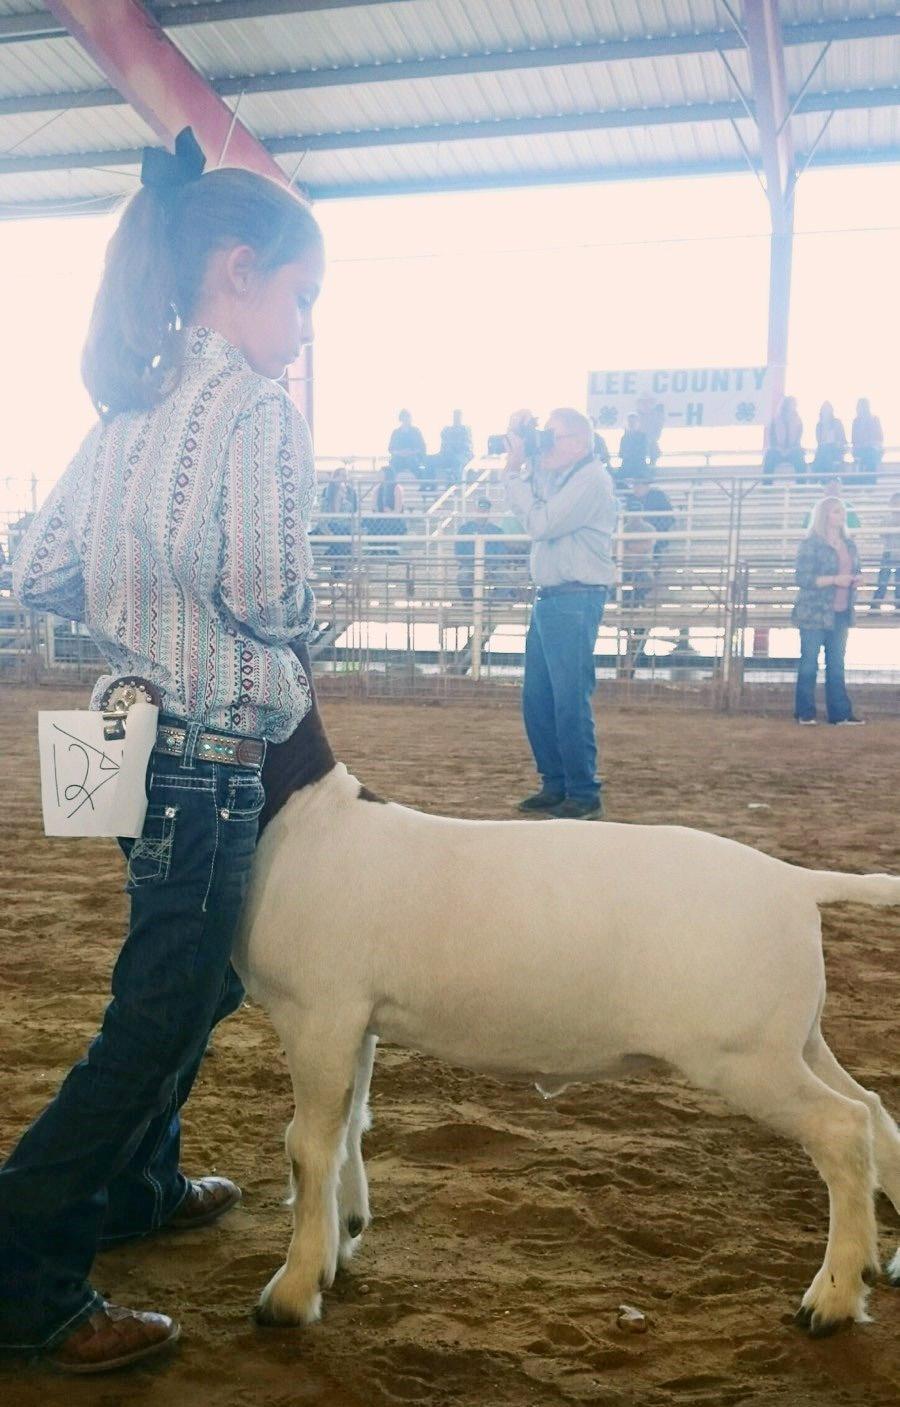 Bayley Pitts, a Lincoln 4-H member, exhibits her goat in the Show Ring at the 2018 LCJLS.